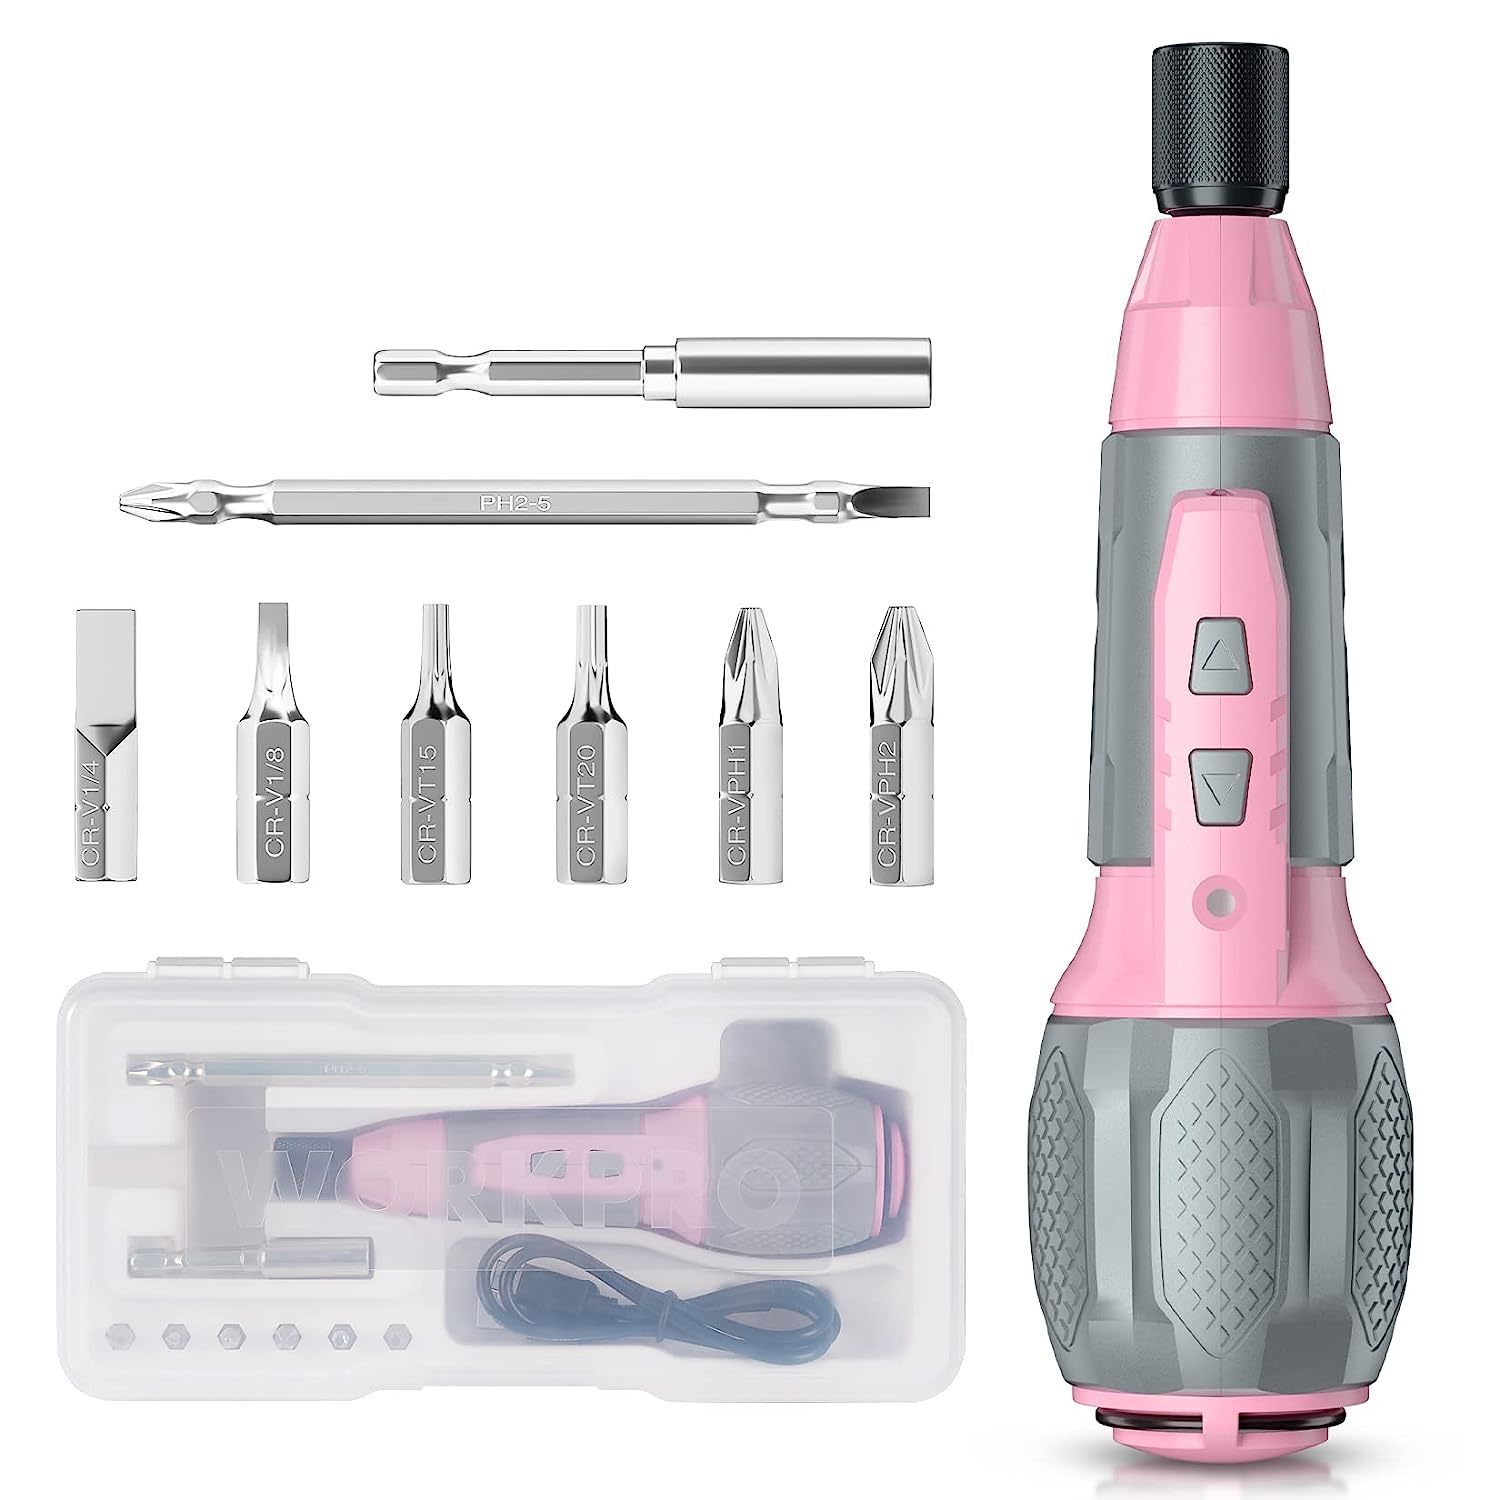 WORKPRO Pink Electric Cordless Screwdriver Set, 4V USB Rechargeable Lithium-ion  - $45.99